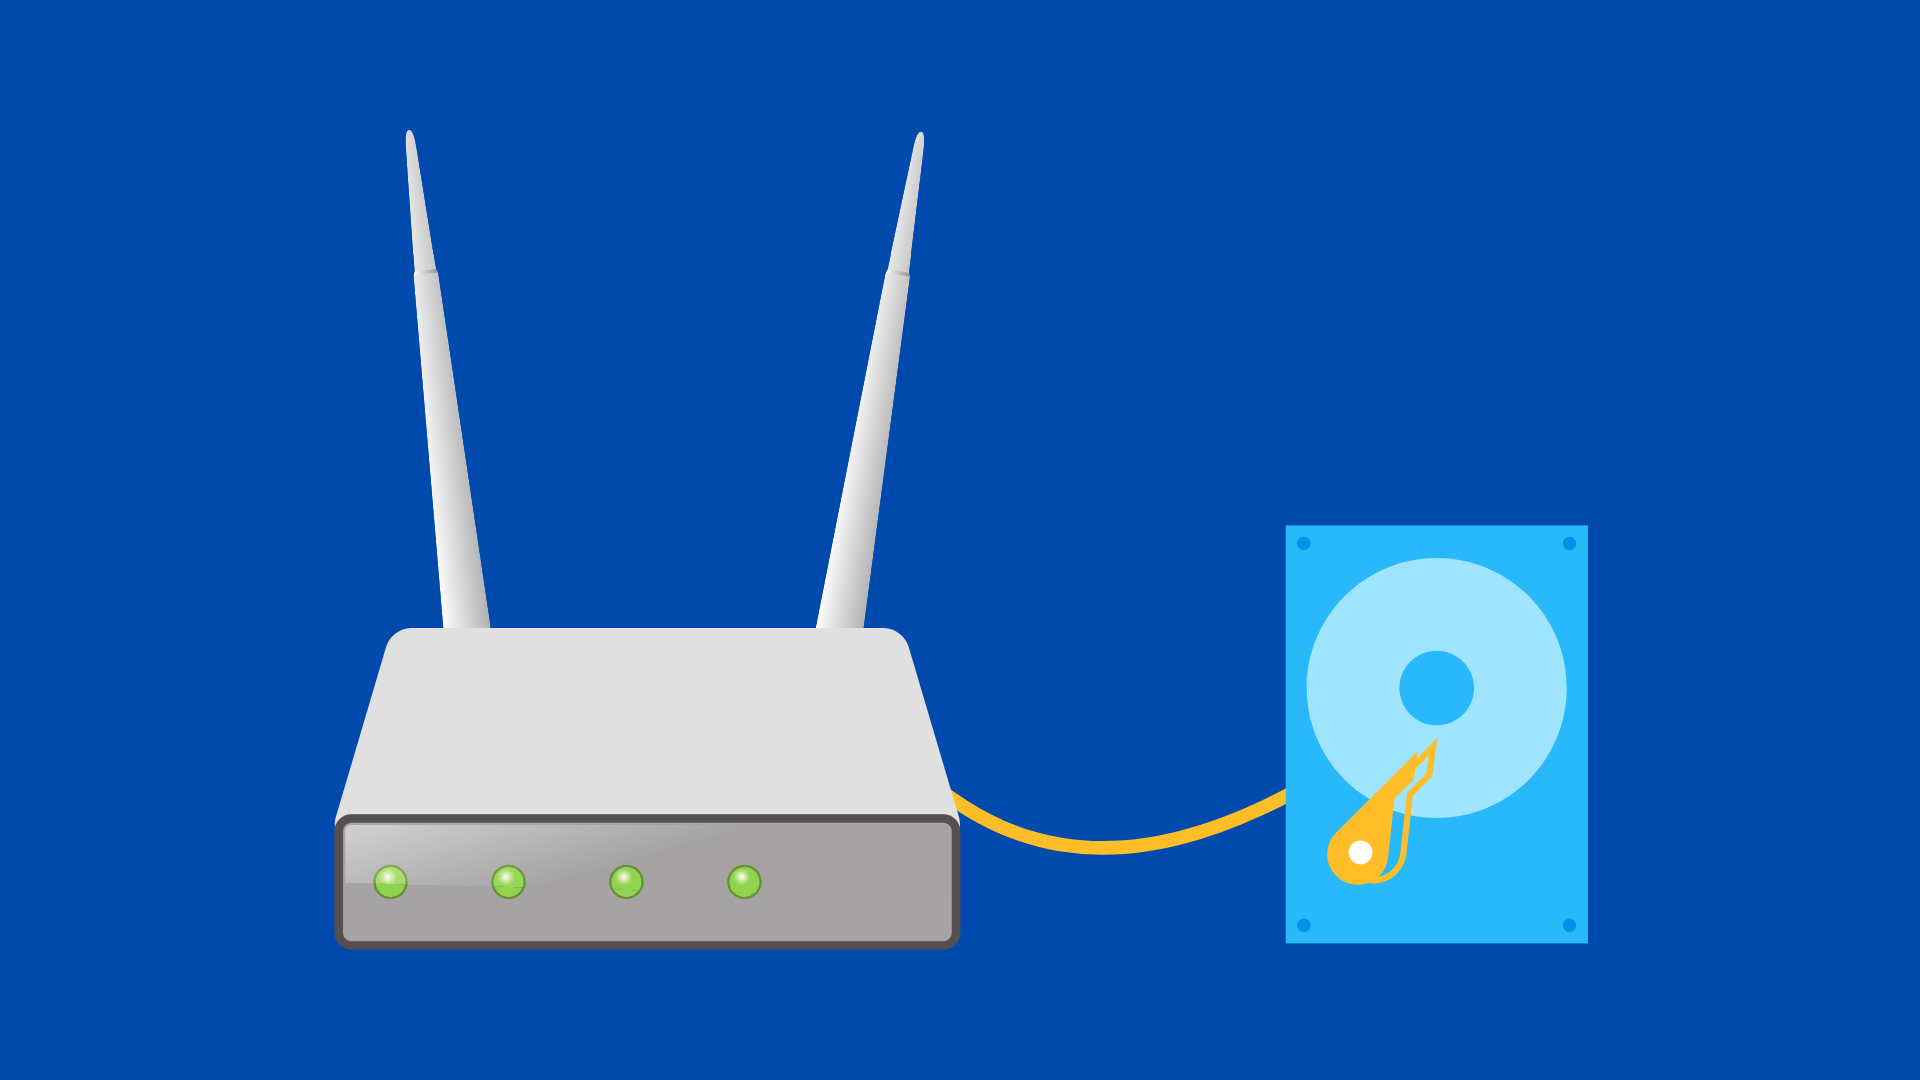 Backups Via The USB Port On Your Router